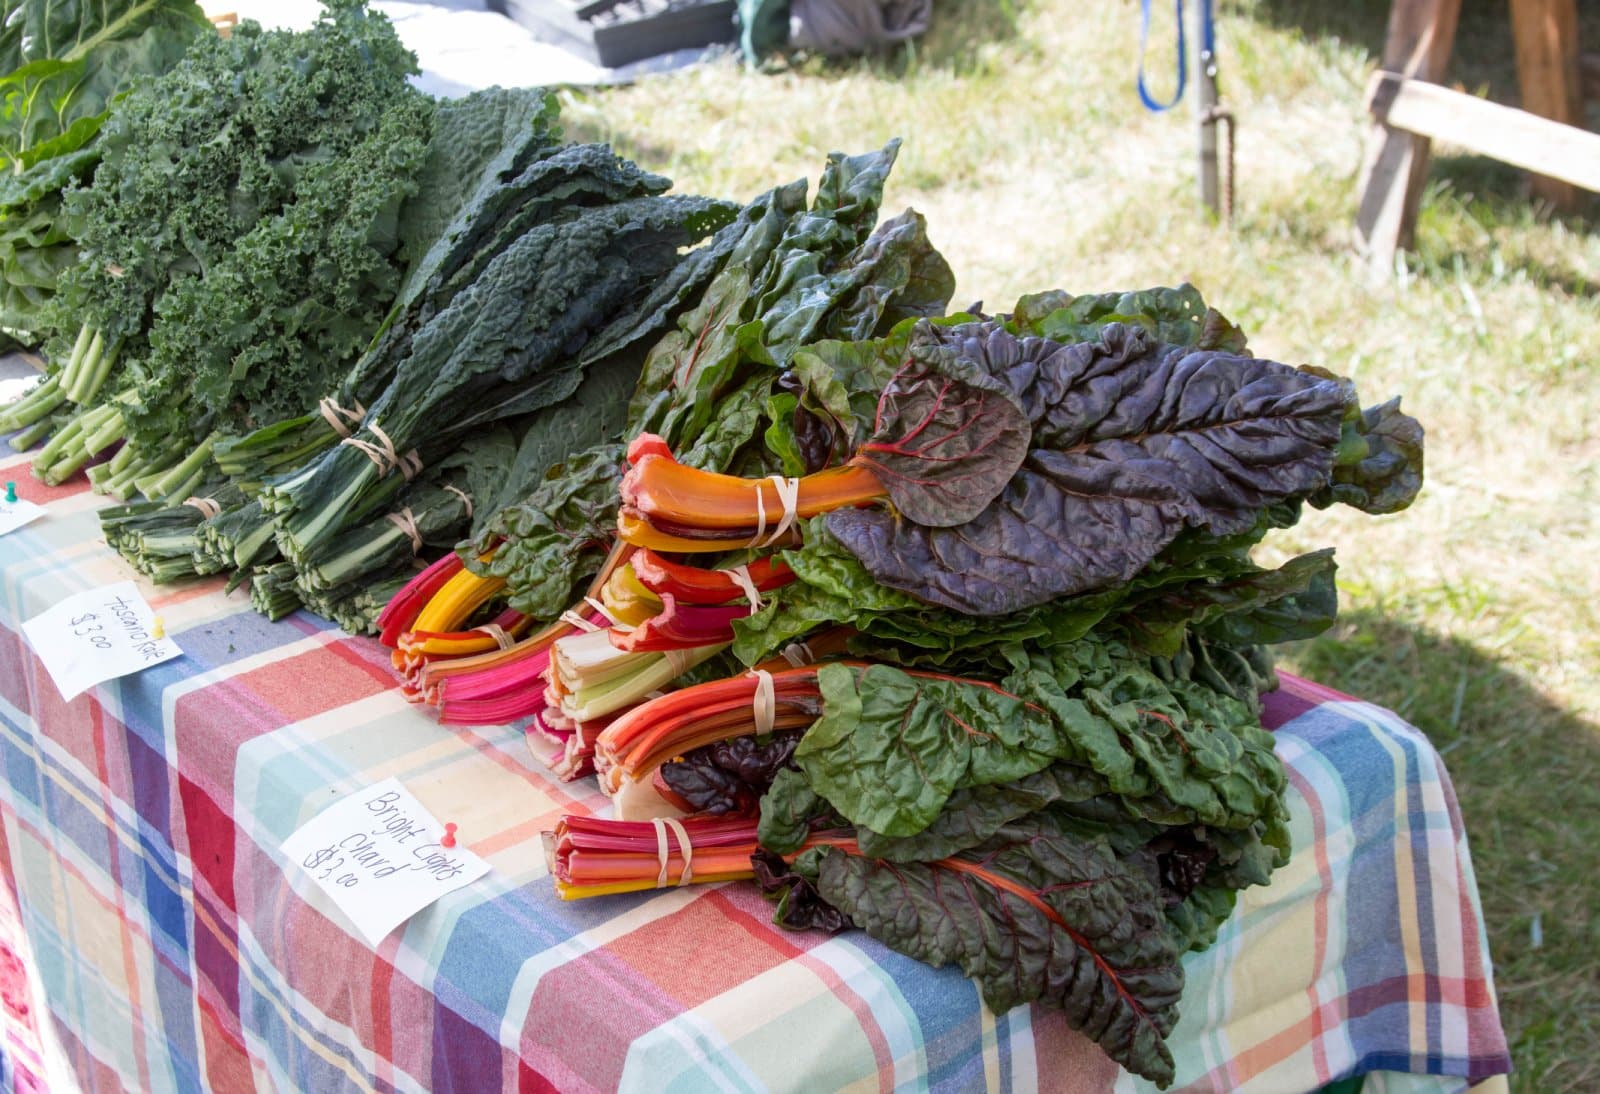 <p class="wp-caption-text">Image Credit: Shutterstock / Peter Pierce</p>  <p>Experience the best of Maine’s organic farming and sustainability at the Common Ground Country Fair. With a focus on local food, crafts, and community, it’s an enriching experience for a minimal entry fee.</p>